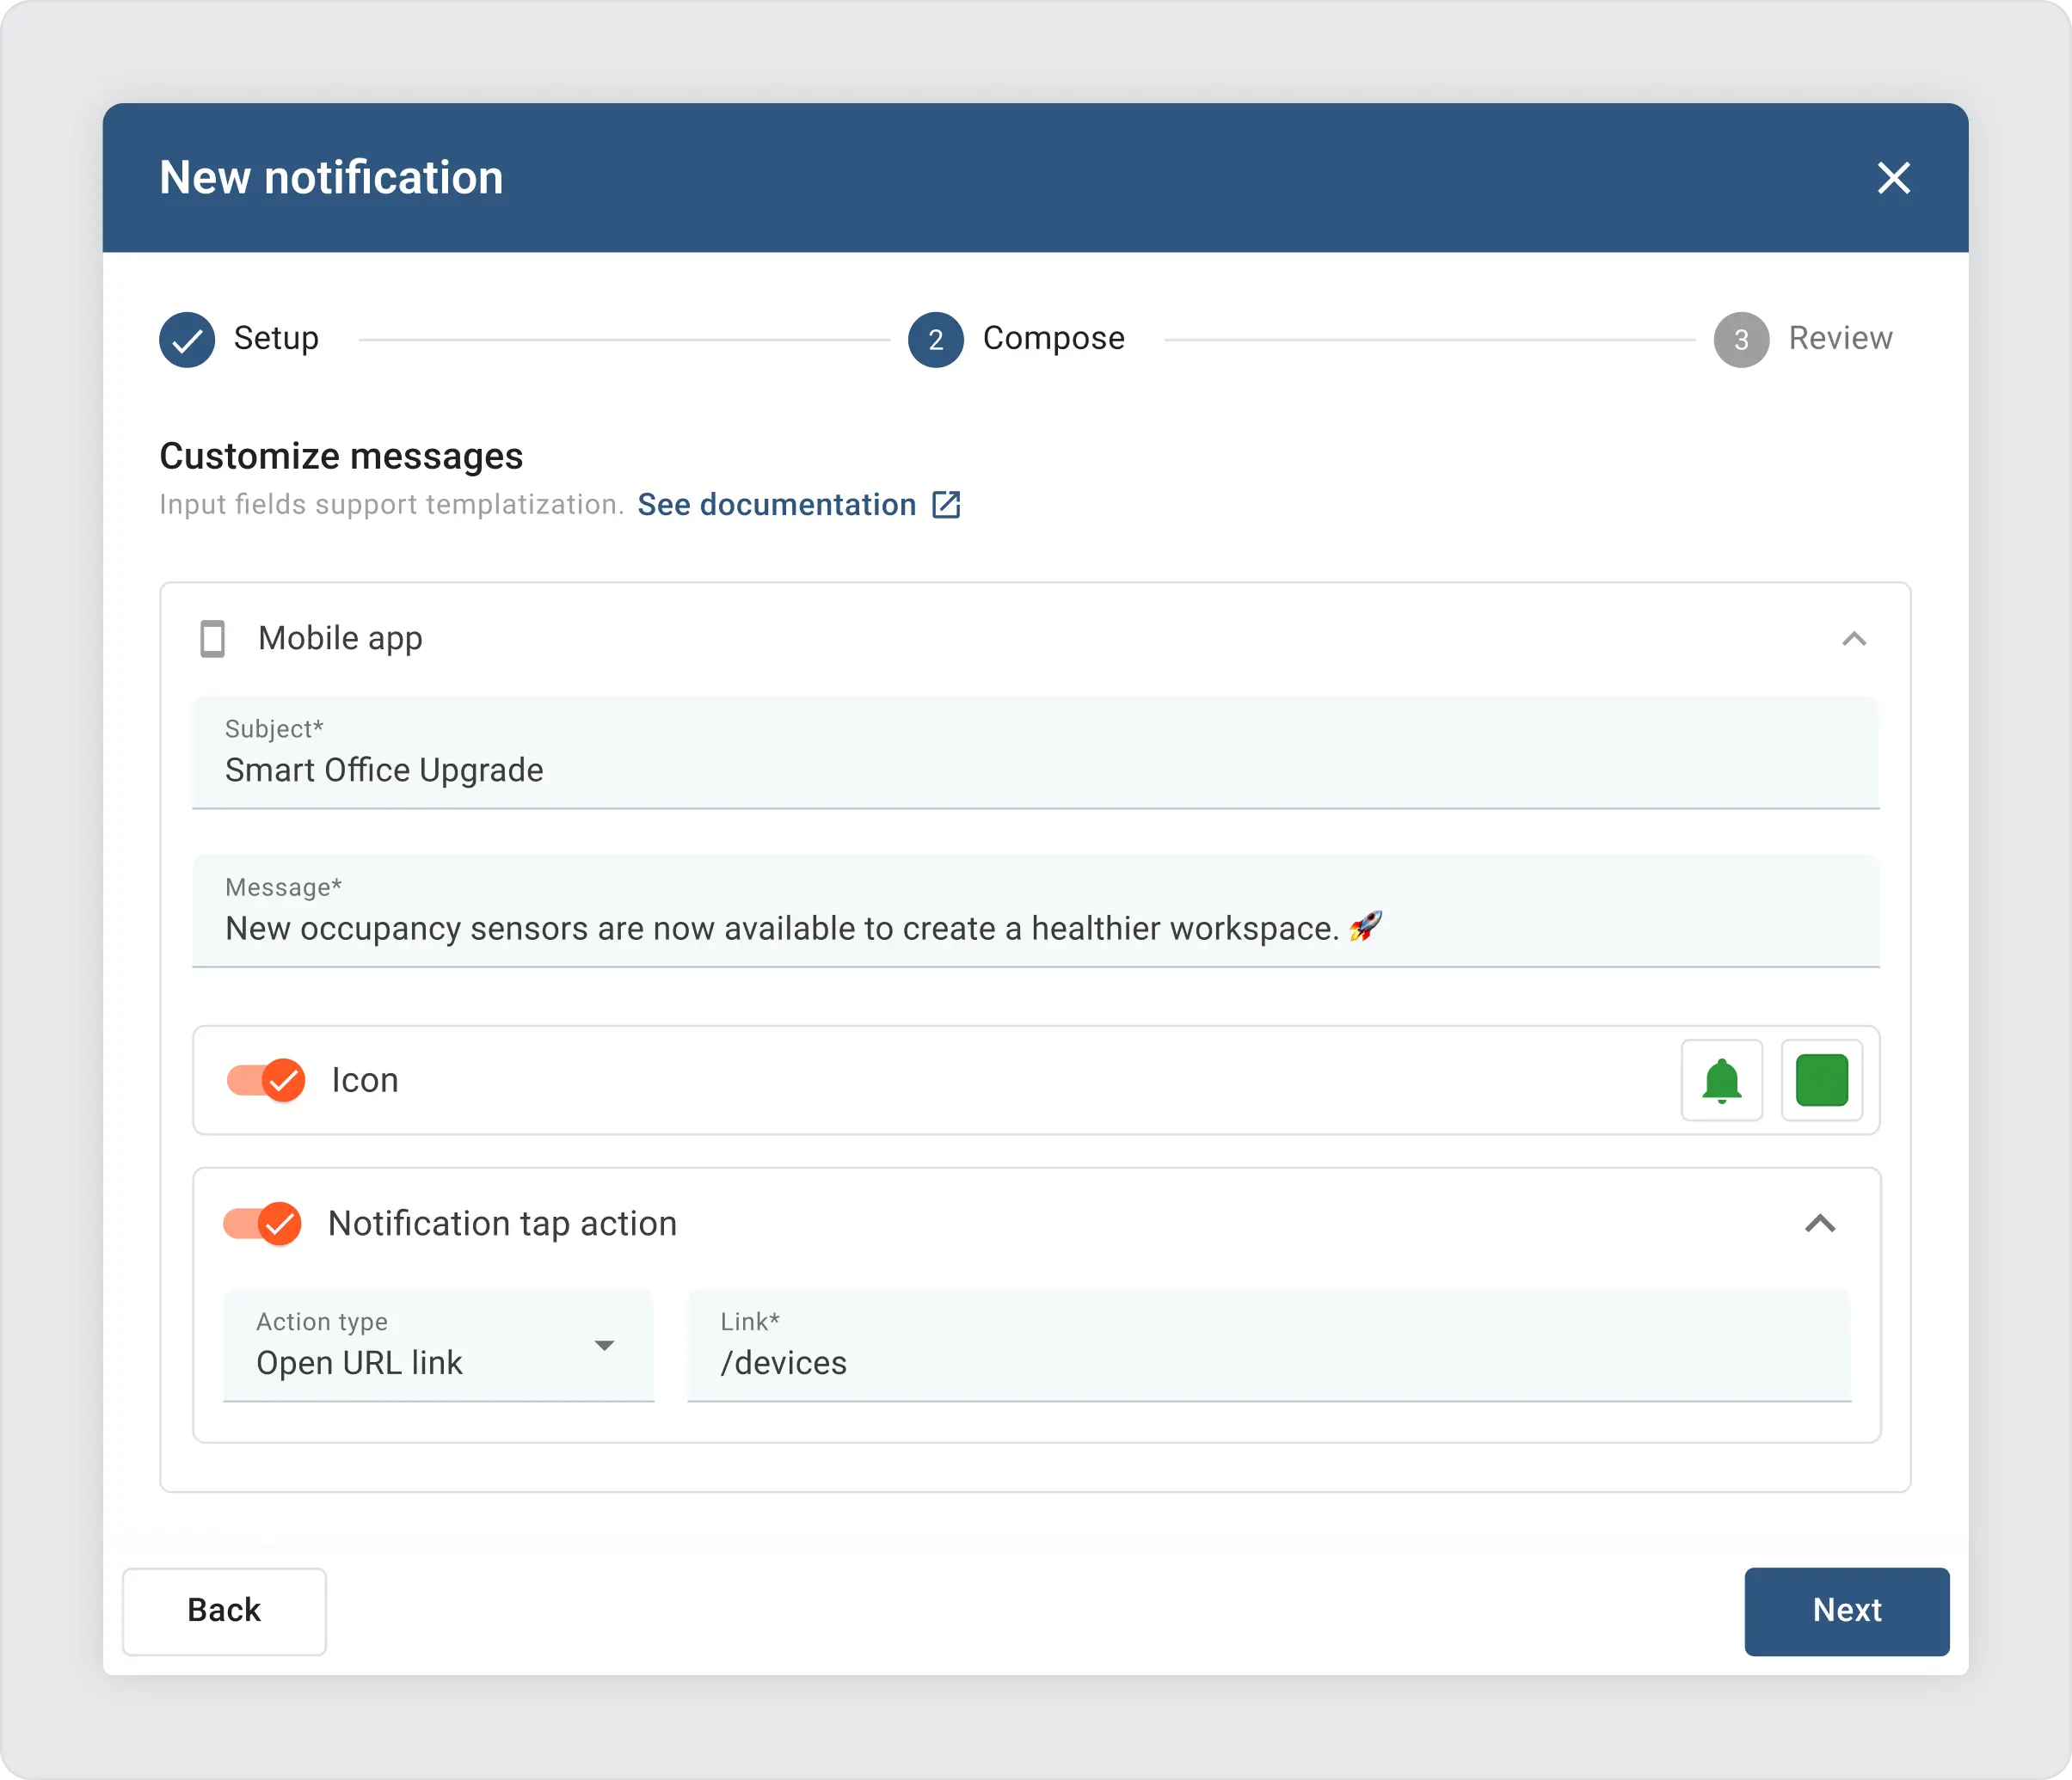 Thingsboard new notification settings form with four fields